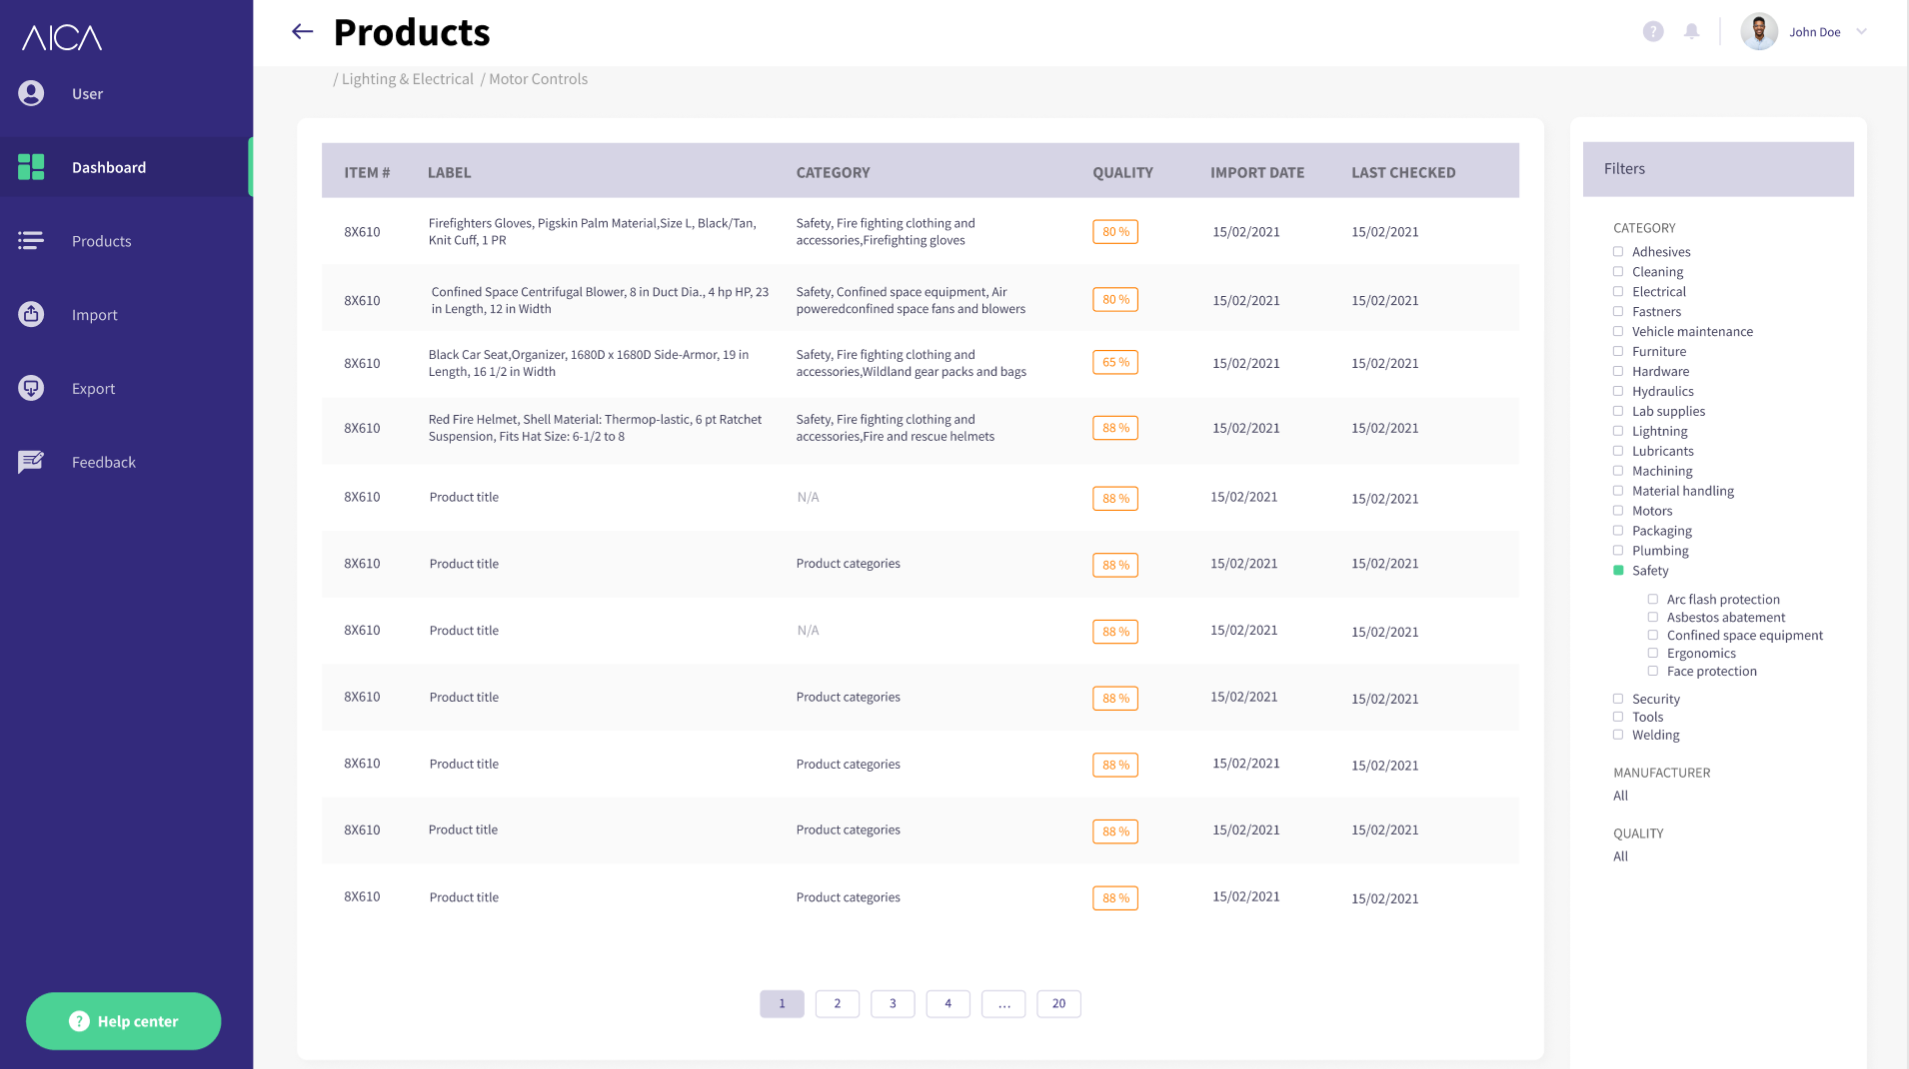 AICA Product Data Enrichment - Product Descriptions. The screenshot displays the Product Descriptions feature of our SAAS app. Users can enrich product data by adding Specification Details (technical specifics), Usability highlights, Comparative Information, Origin details, and accurate Categorization. This enhances search and filter functionalities, providing comprehensive product information